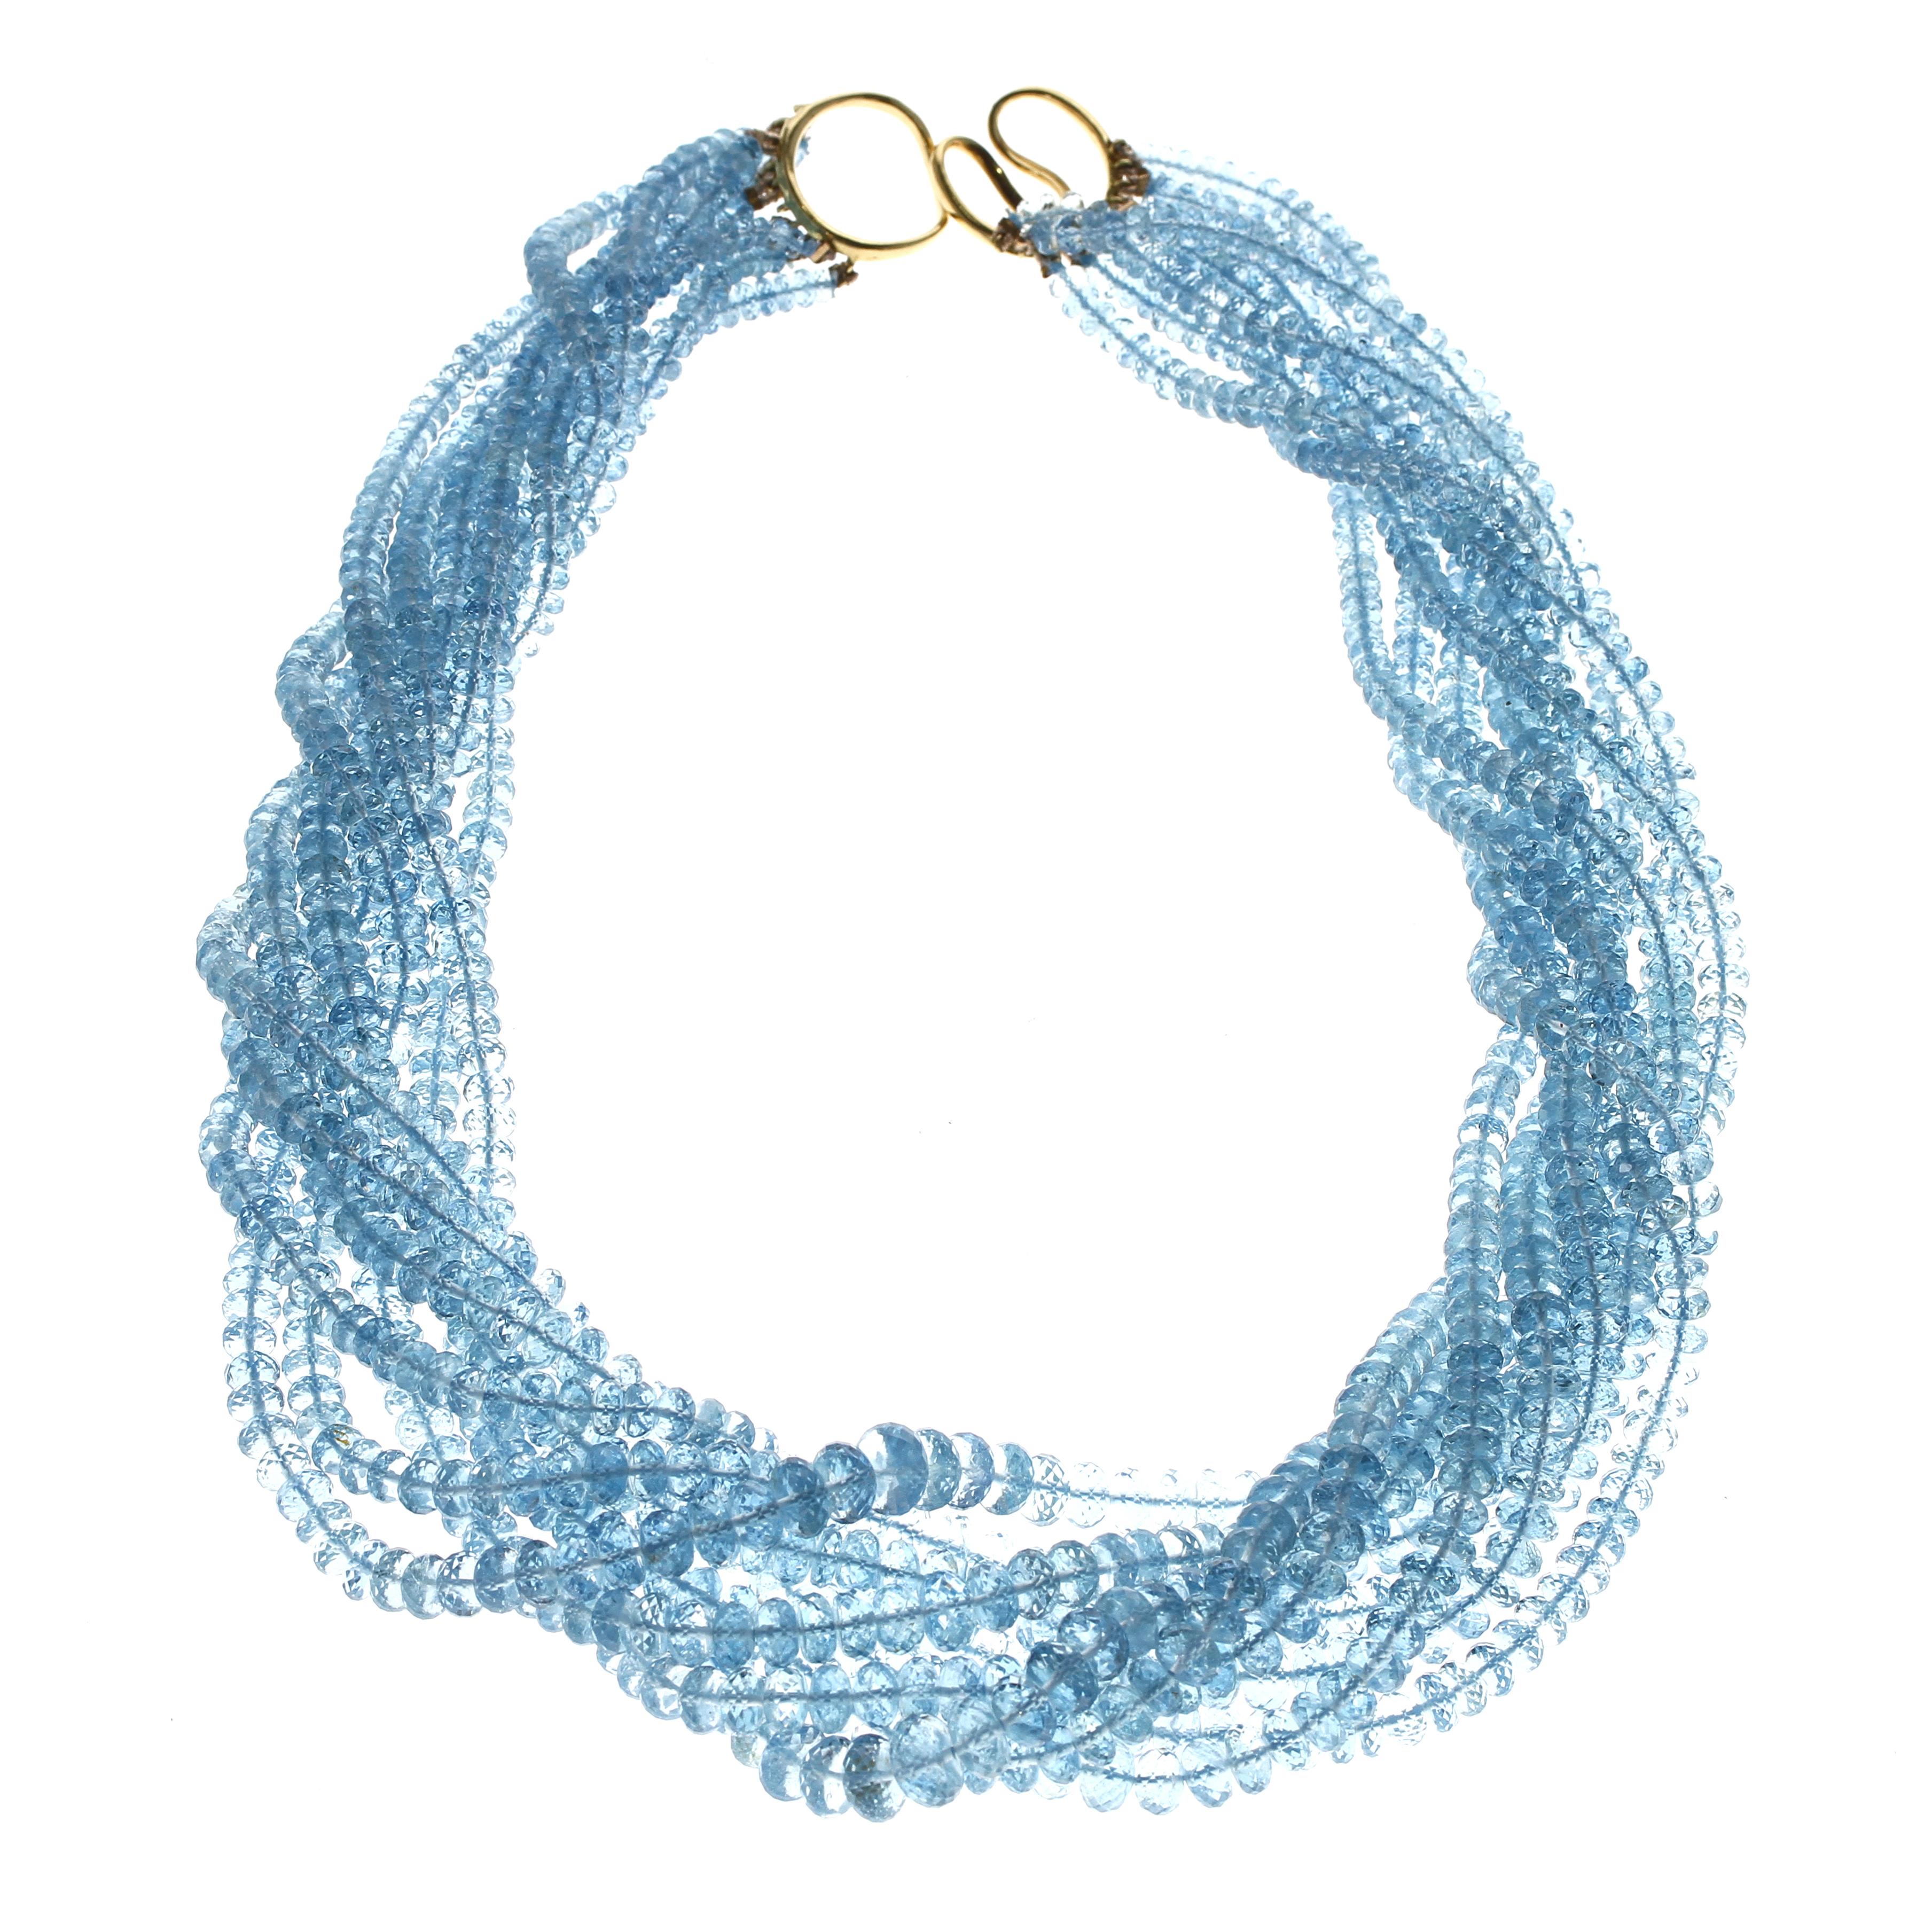 An extremely fine aquamarine bead necklace set with an 18kt yellow gold clasp; the total weight of the necklace is 845 carats; the length is 18.5 inches.